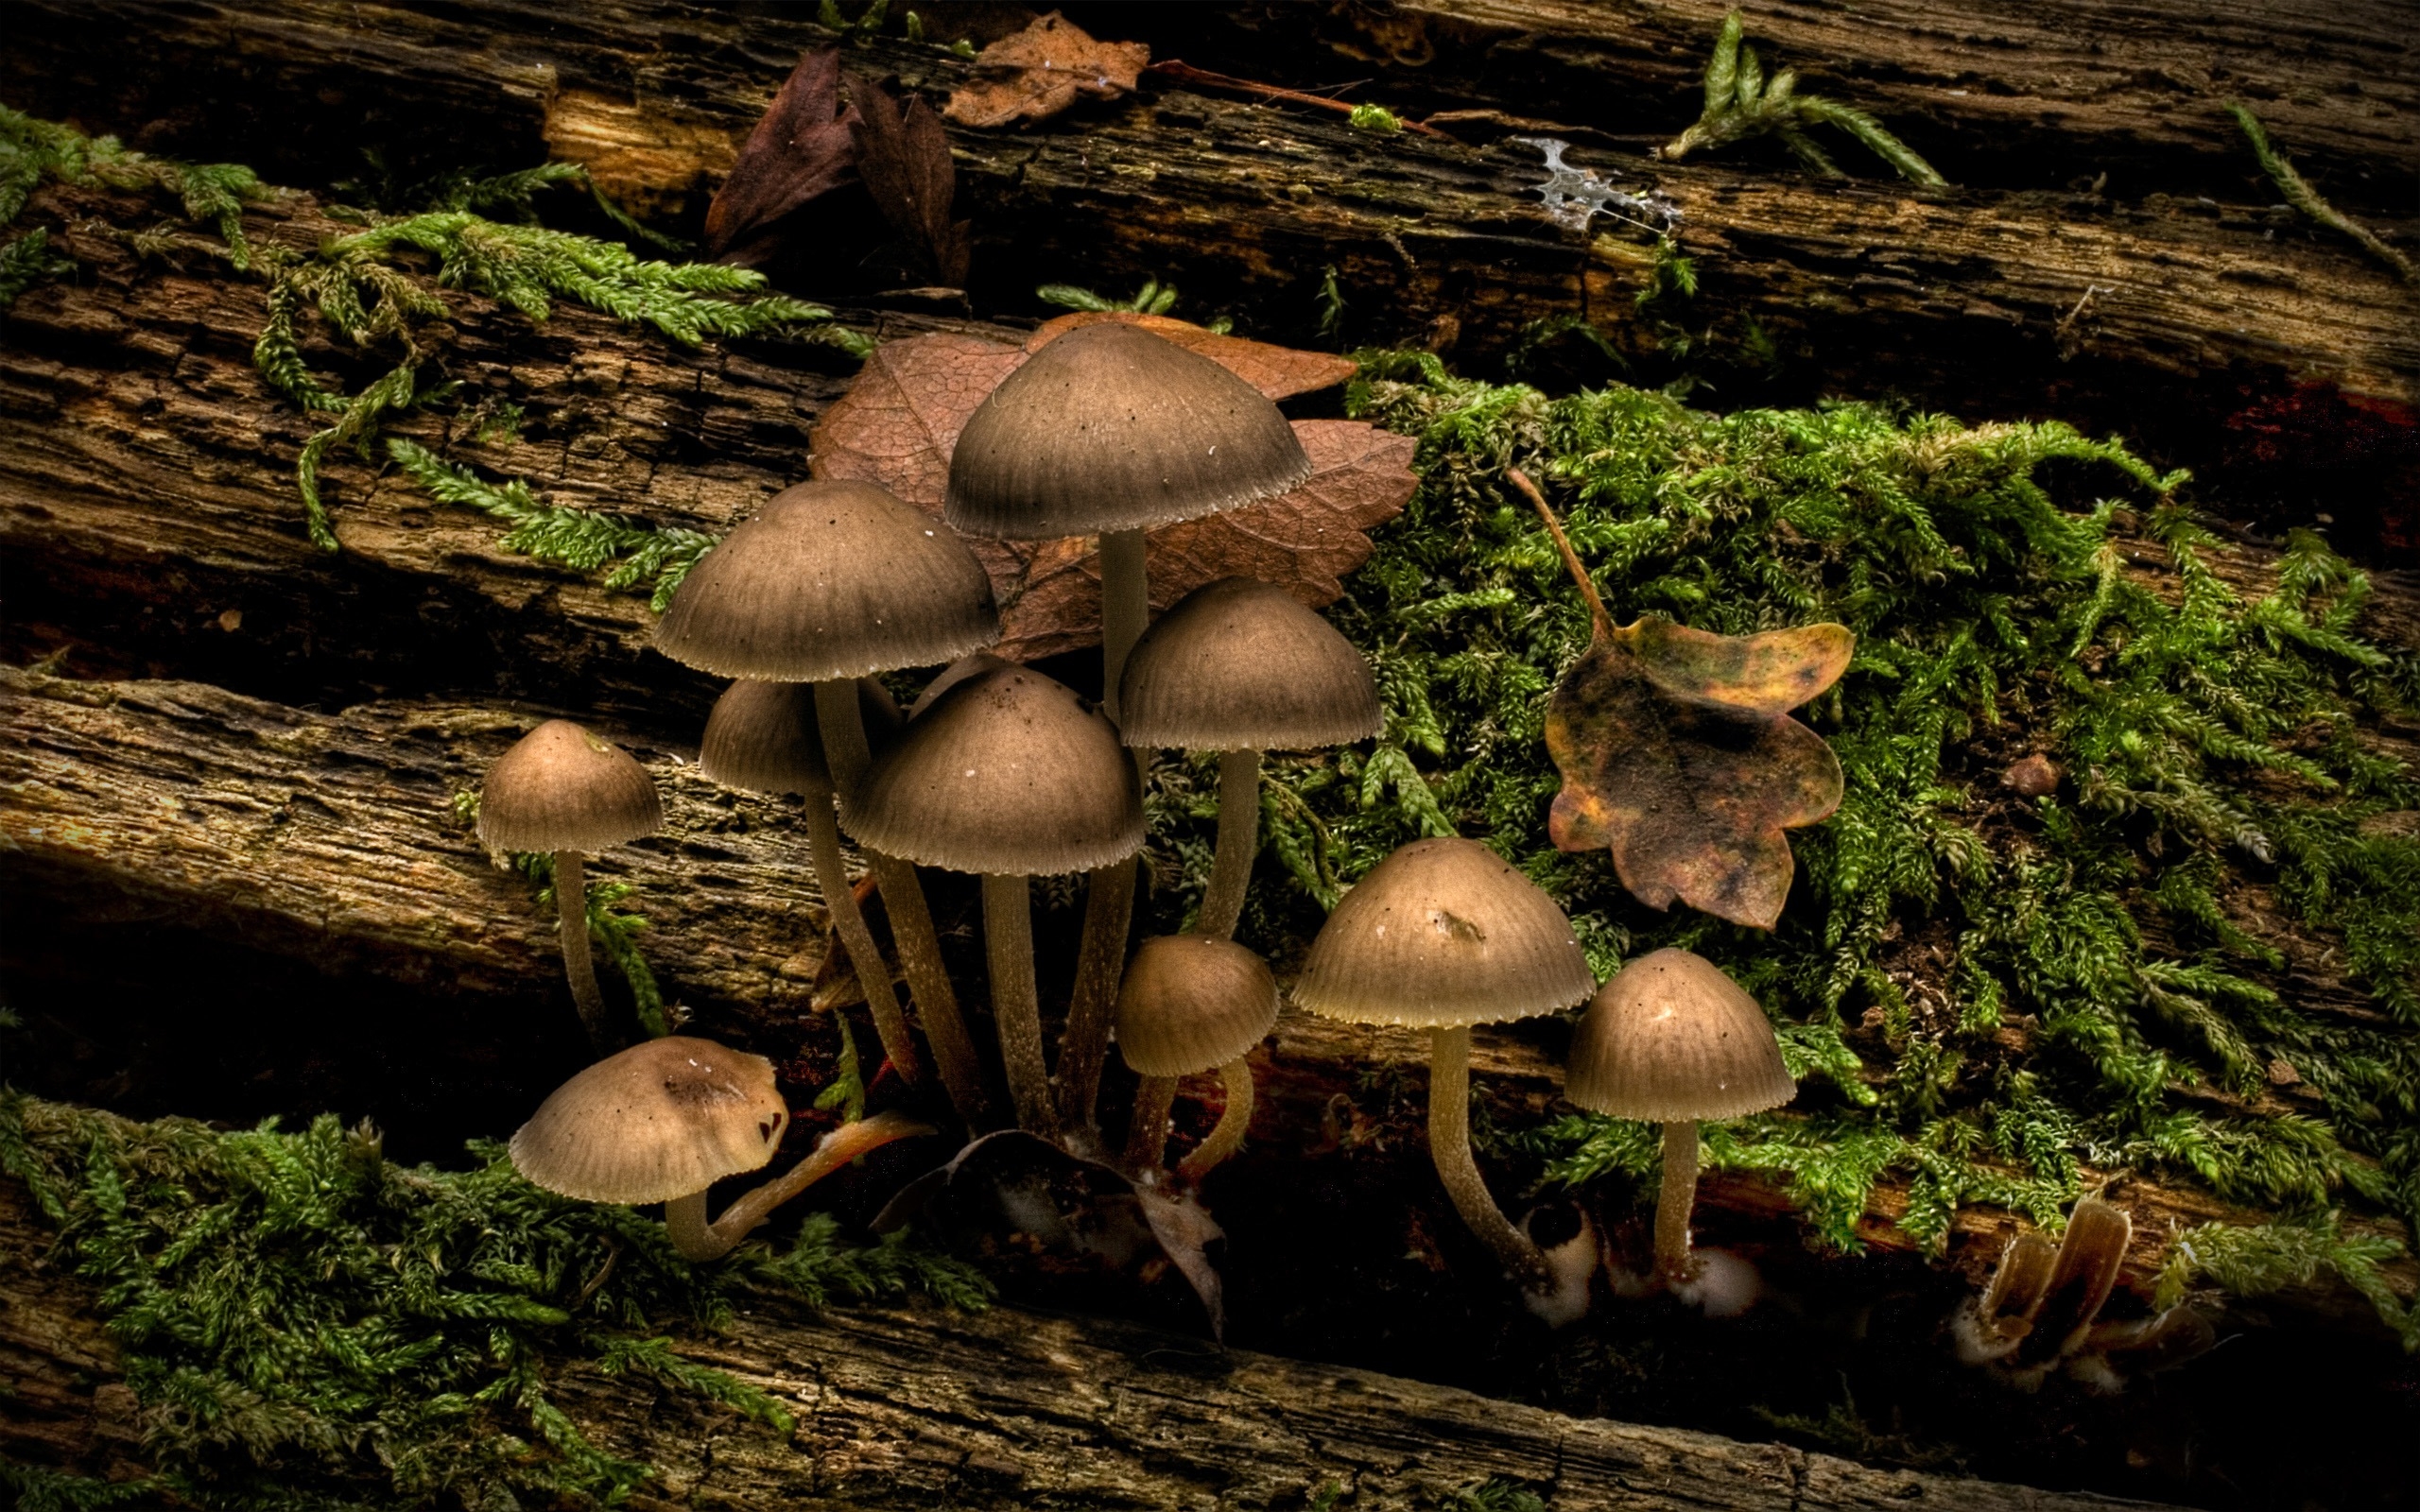 Mushrooms for 2560 x 1600 widescreen resolution